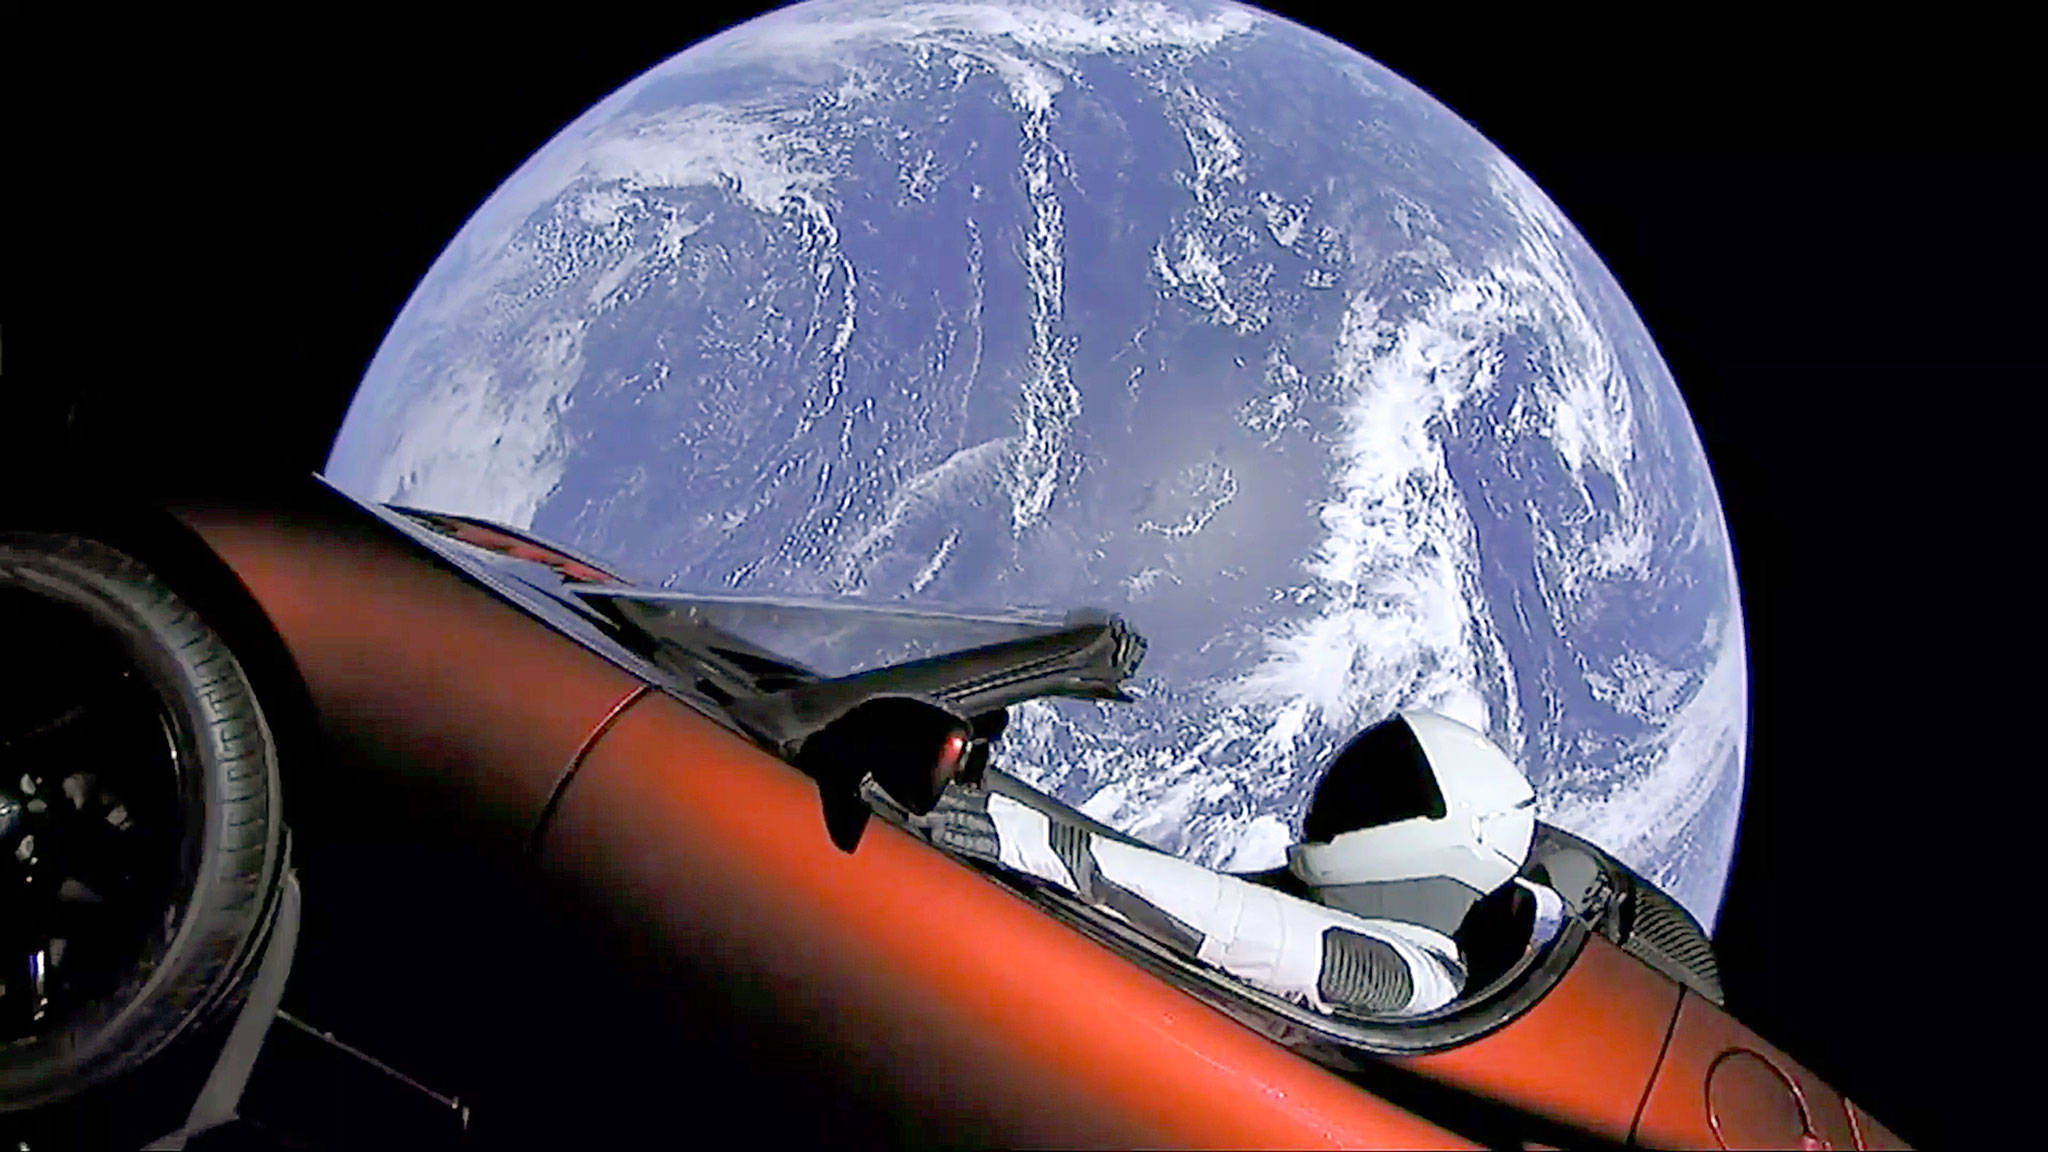 This image from SpaceX video shows the company’s spacesuit in Elon Musk’s Tesla sports car which was launched into space during the first test flight of the Falcon Heavy rocket Tuesday. (SpaceX)